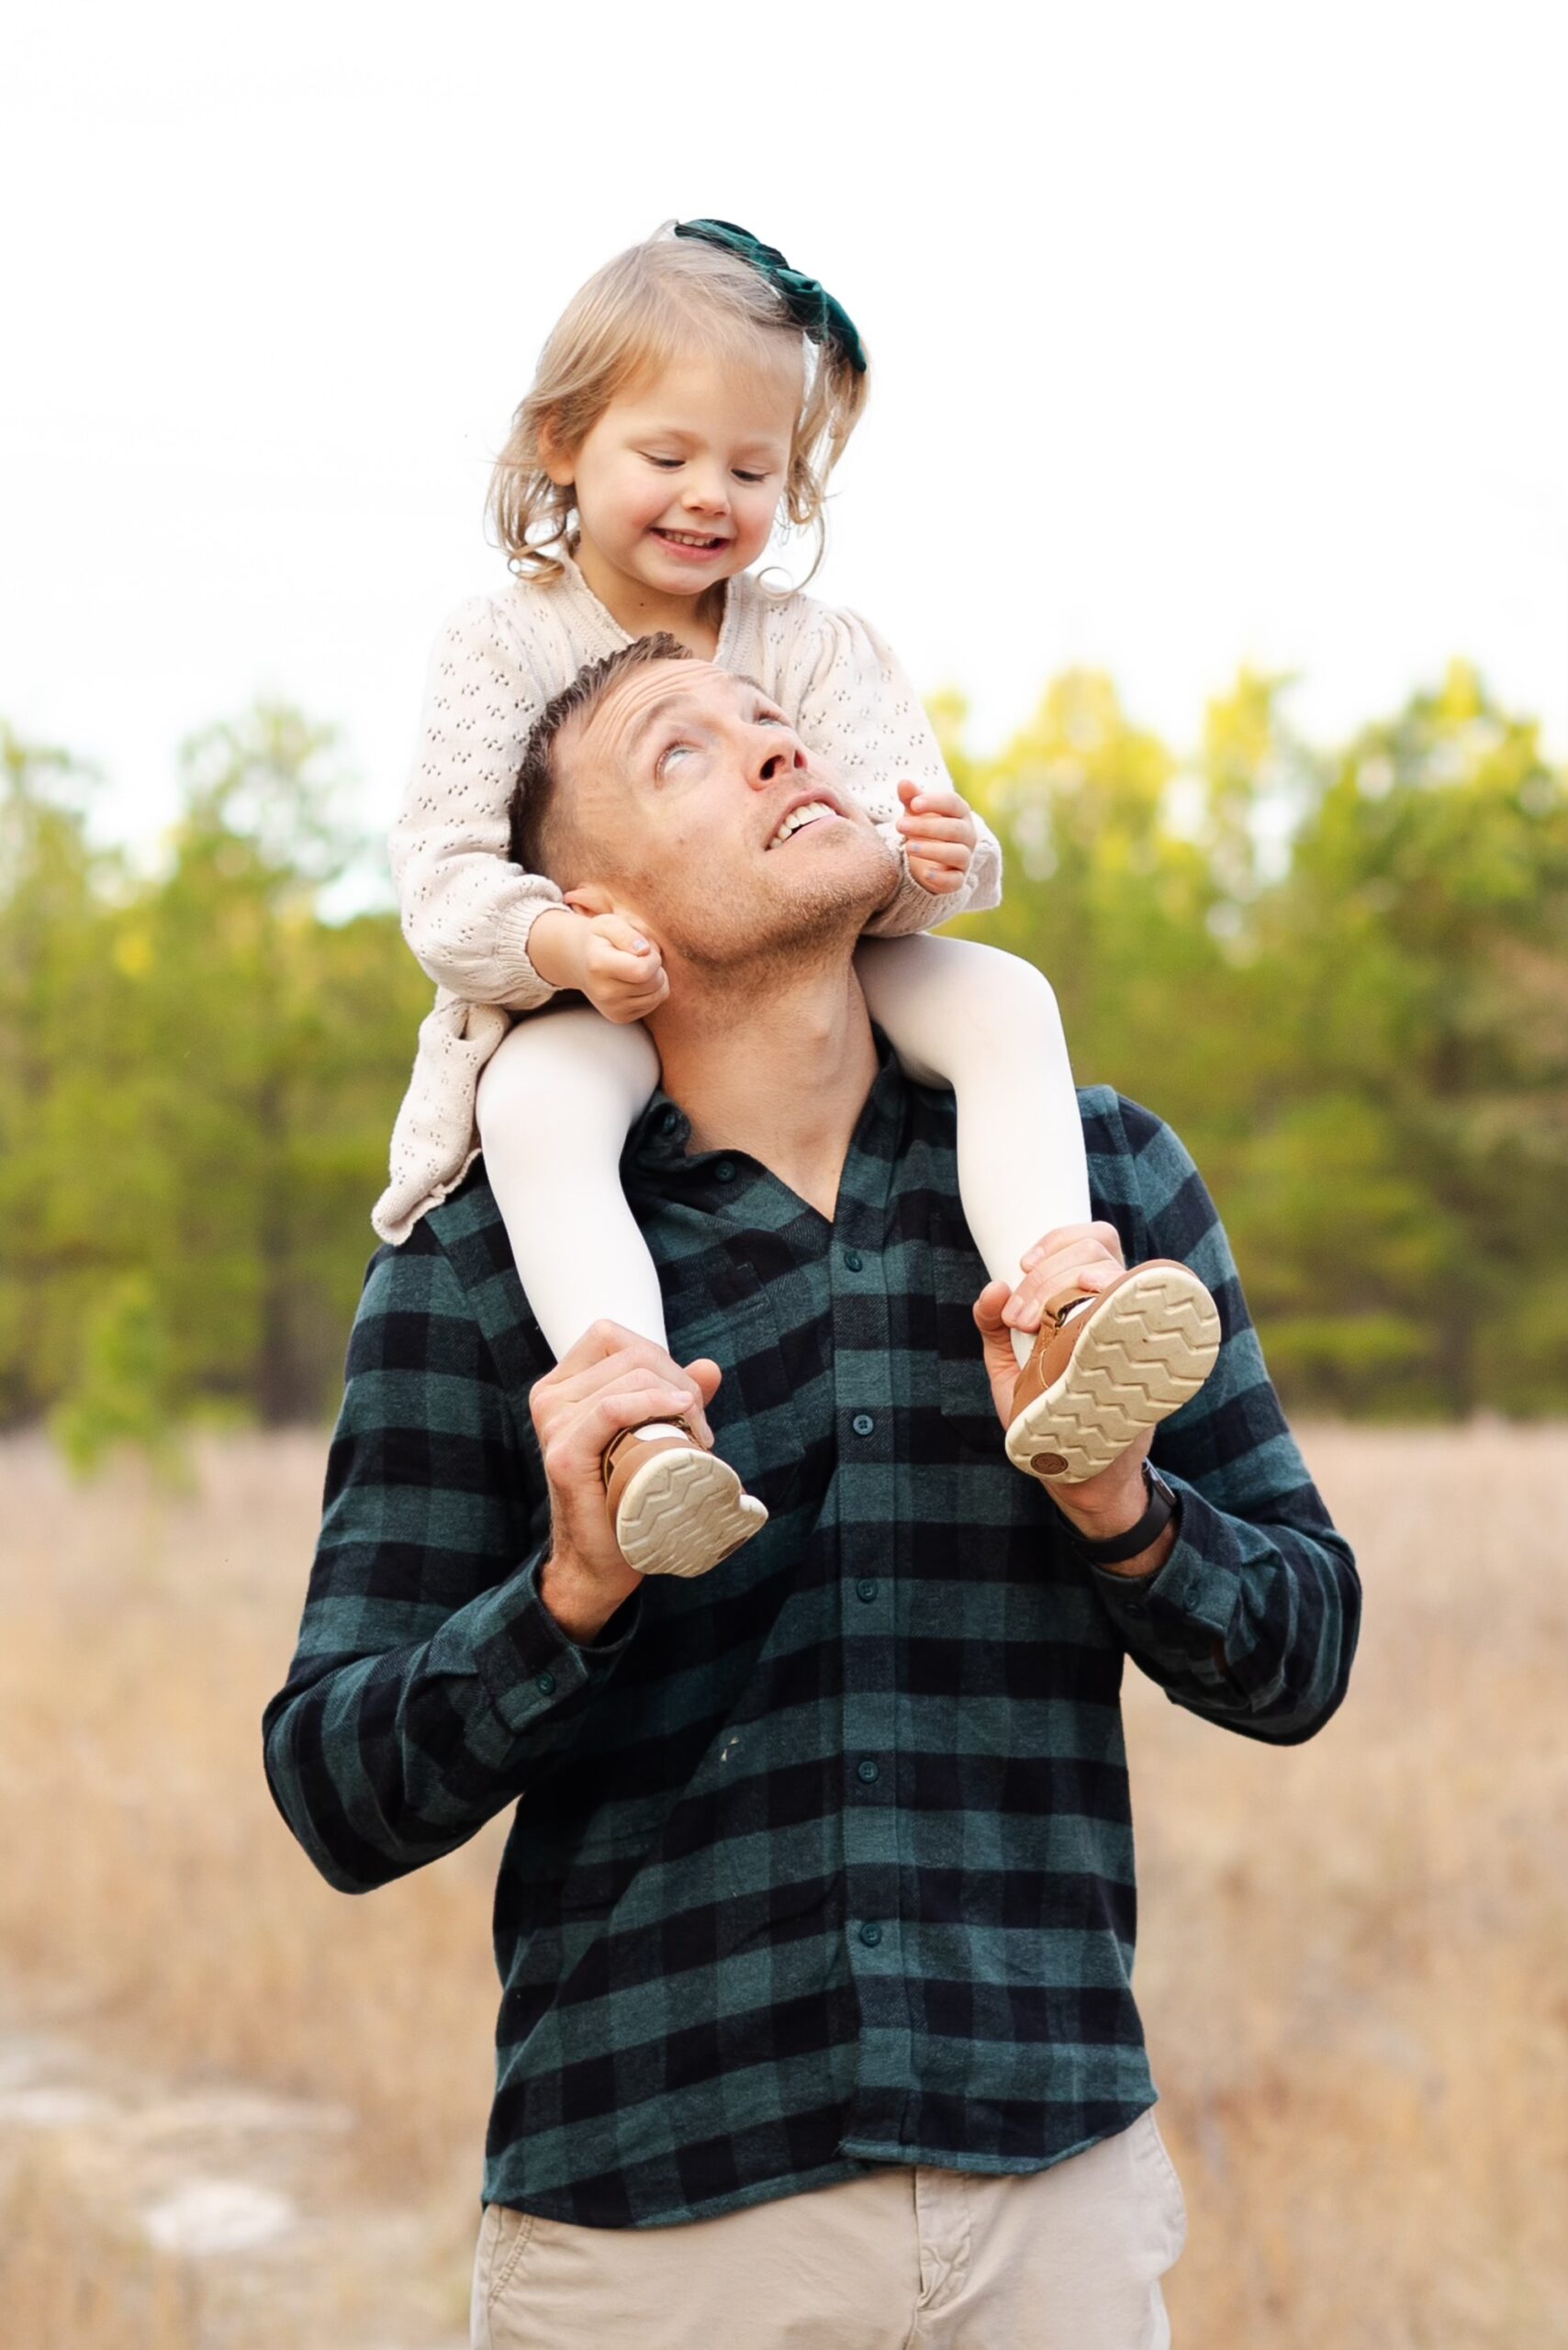 Dr. Robert Gildner,holds his daughter on his shoulders in a field in Lexington, SC